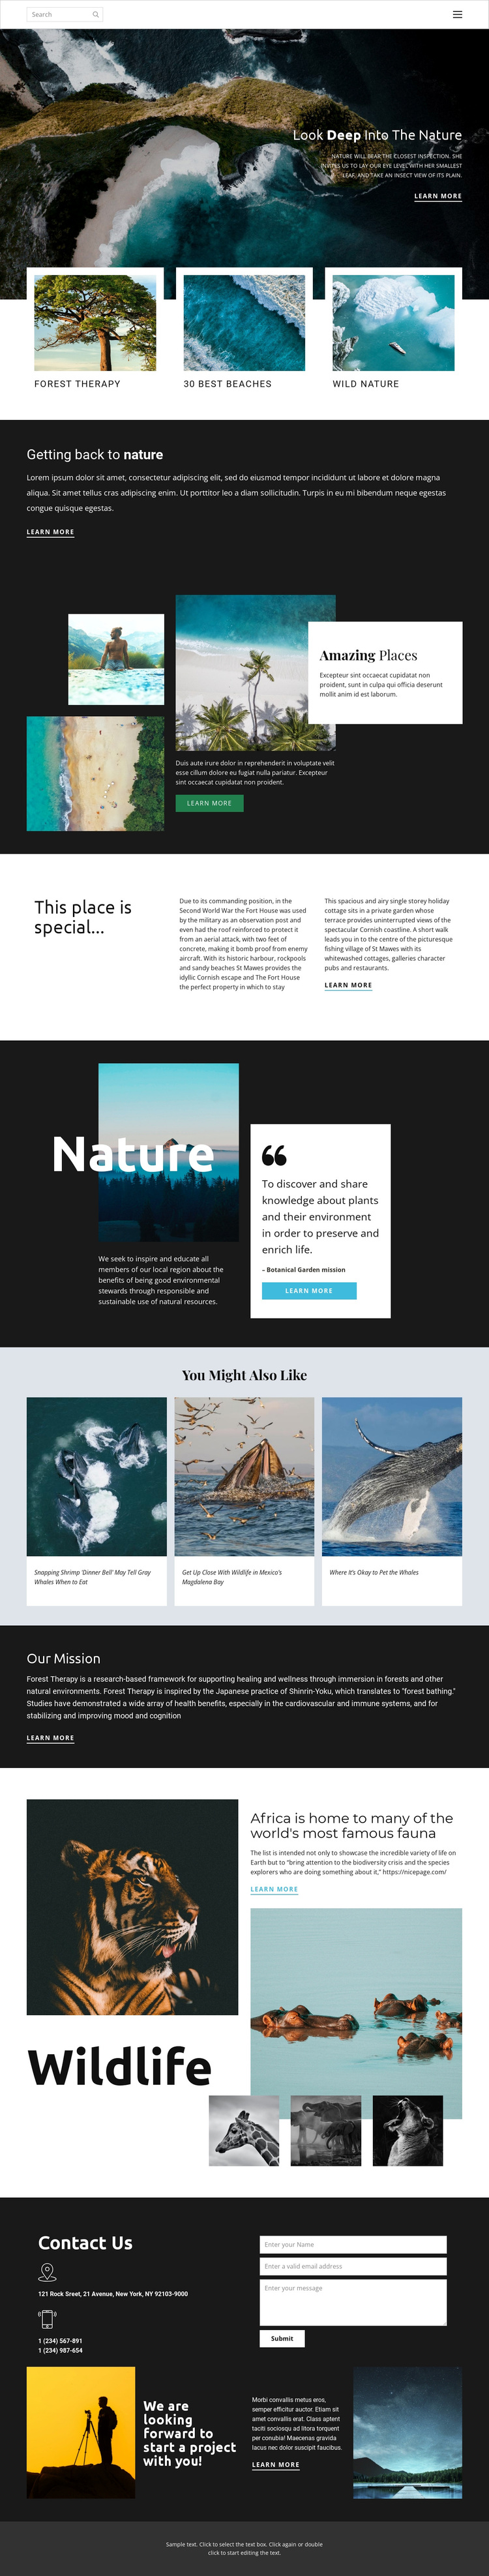 Exploring wildlife and nature Template